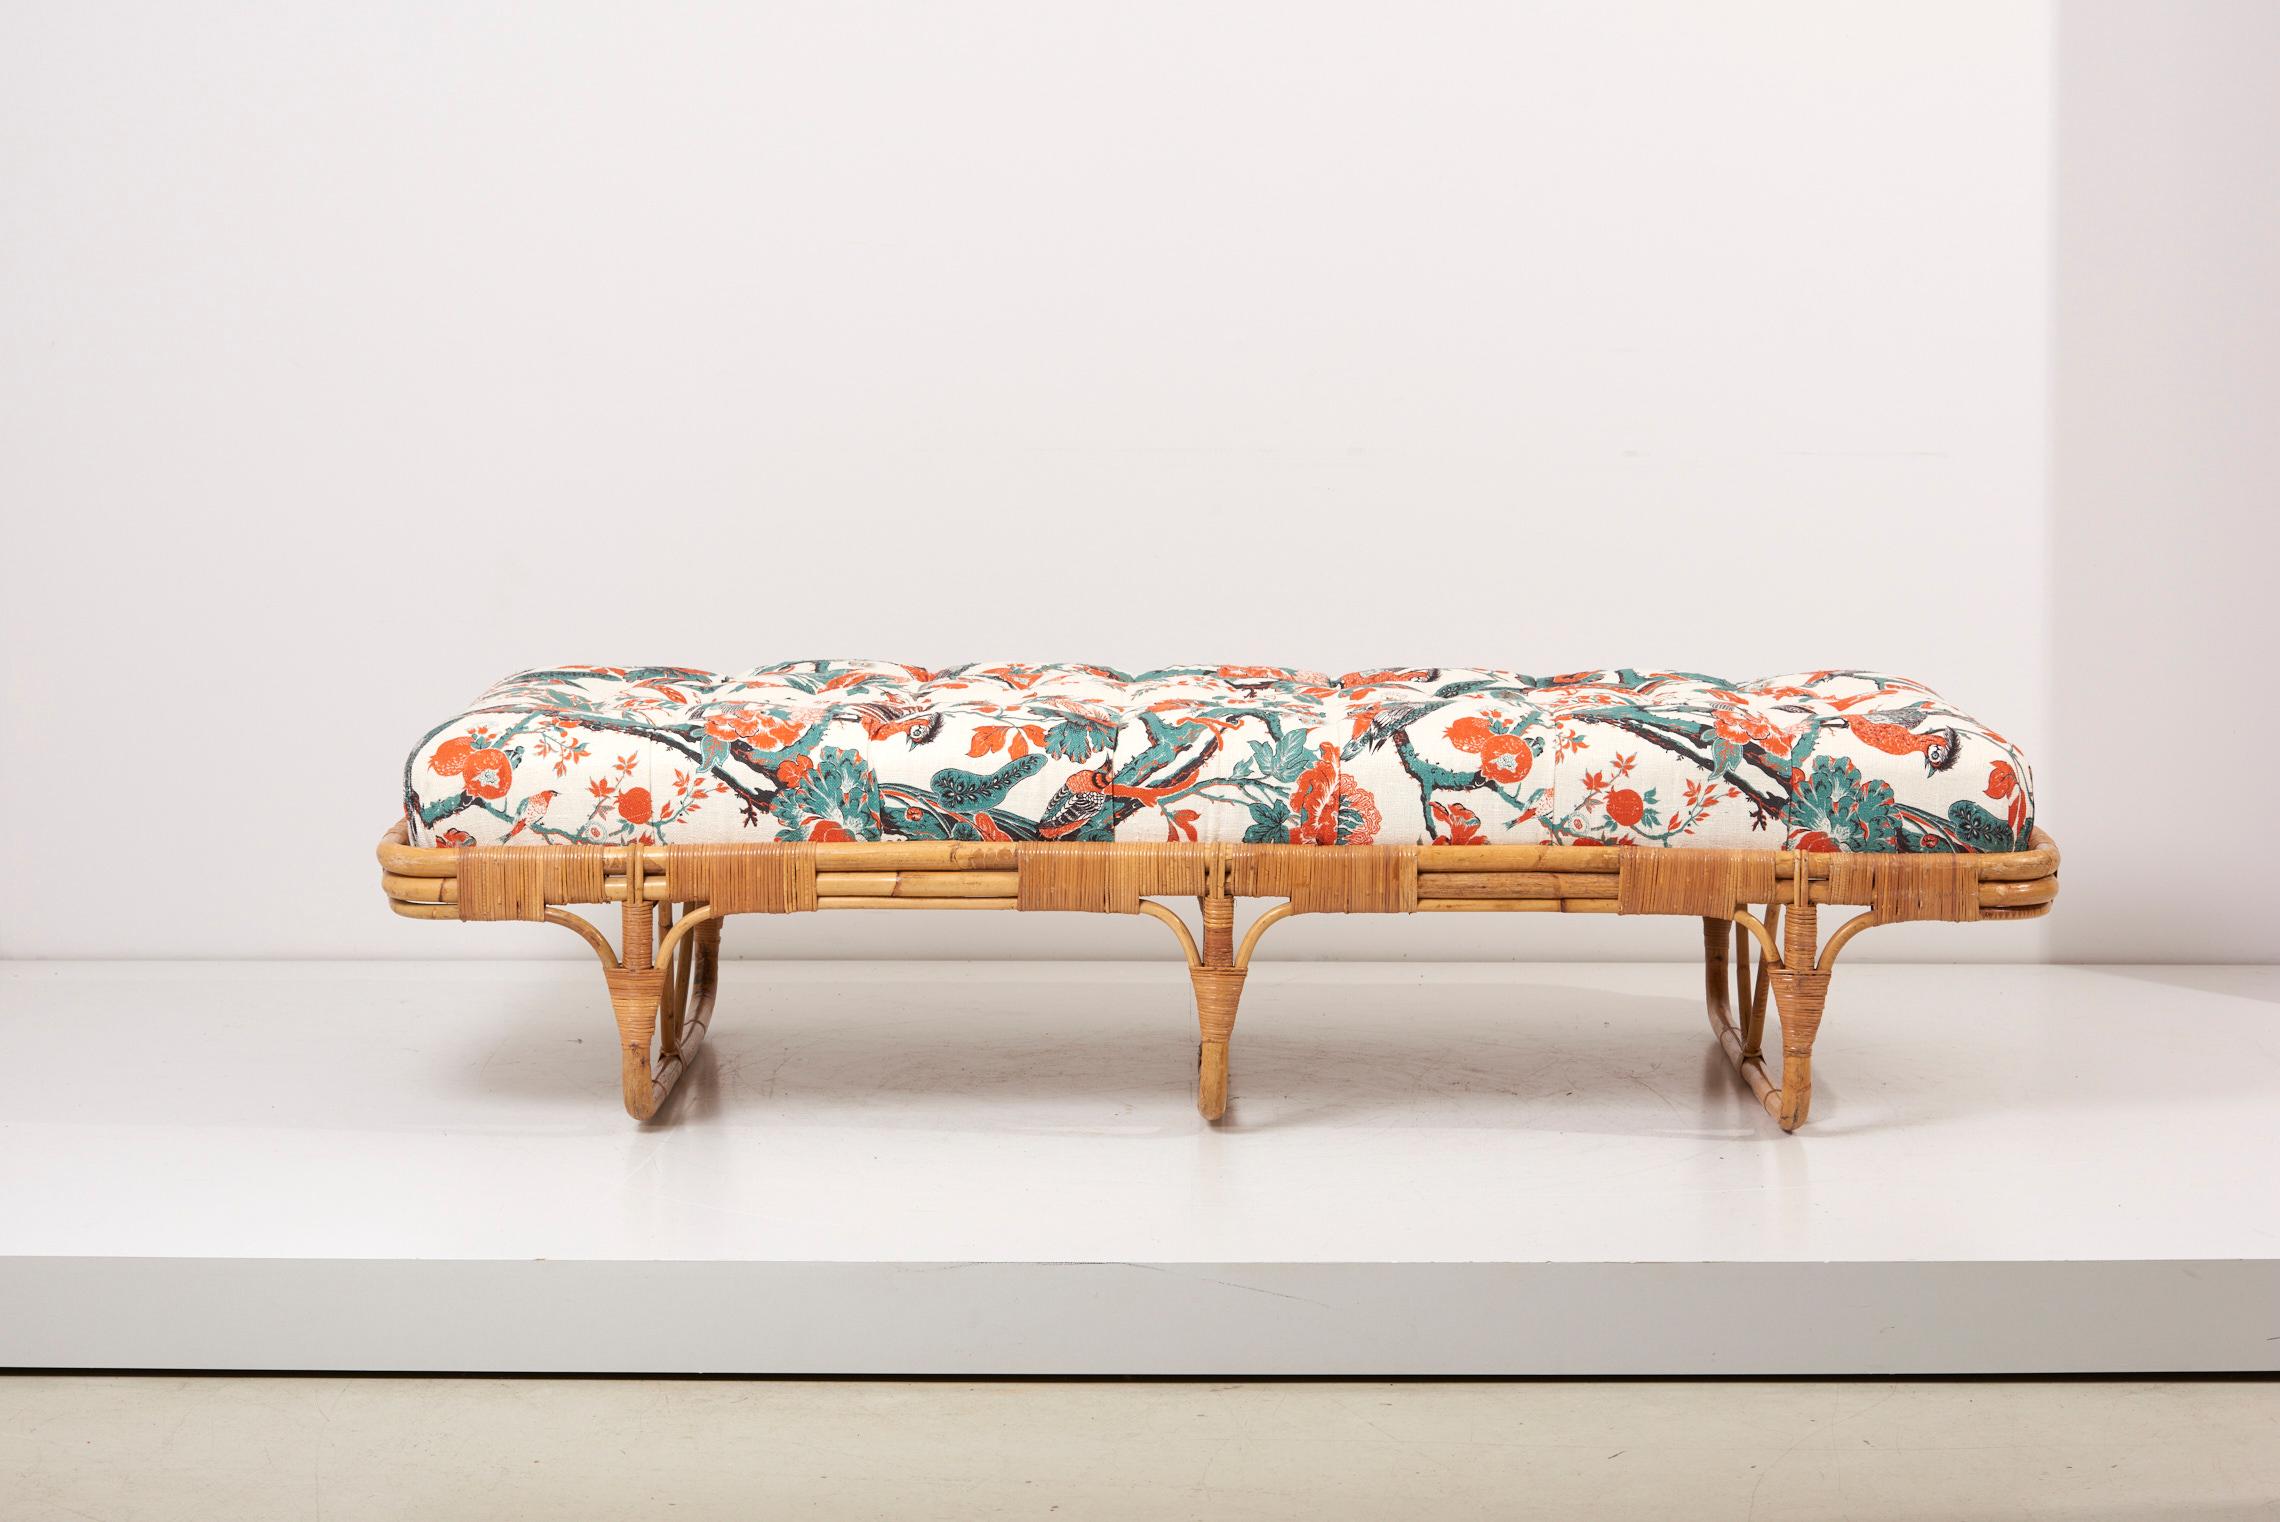 1950s Basket Daybed in a Josef Frank Style Fabric In Good Condition For Sale In Berlin, DE